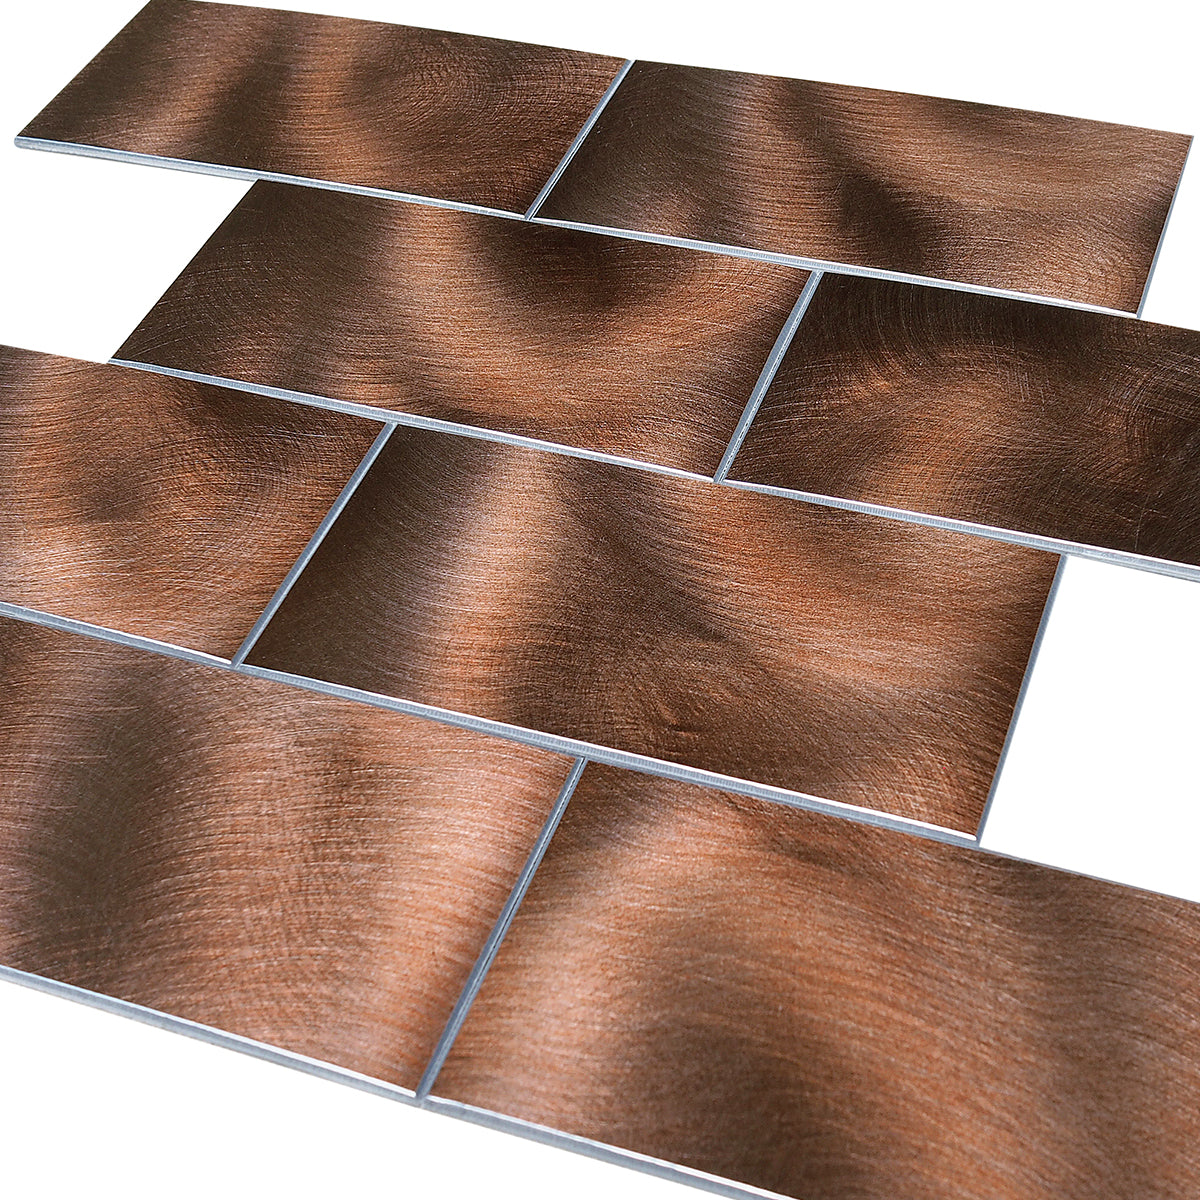 Decopsu Peel and Stick Metal Subway Tile Backsplash (Rotary Abrased 15in x 12in 1.6in Thick) for Kitchen Bathroom Wall Accent (5pc/Pack, RT Dark Brown)